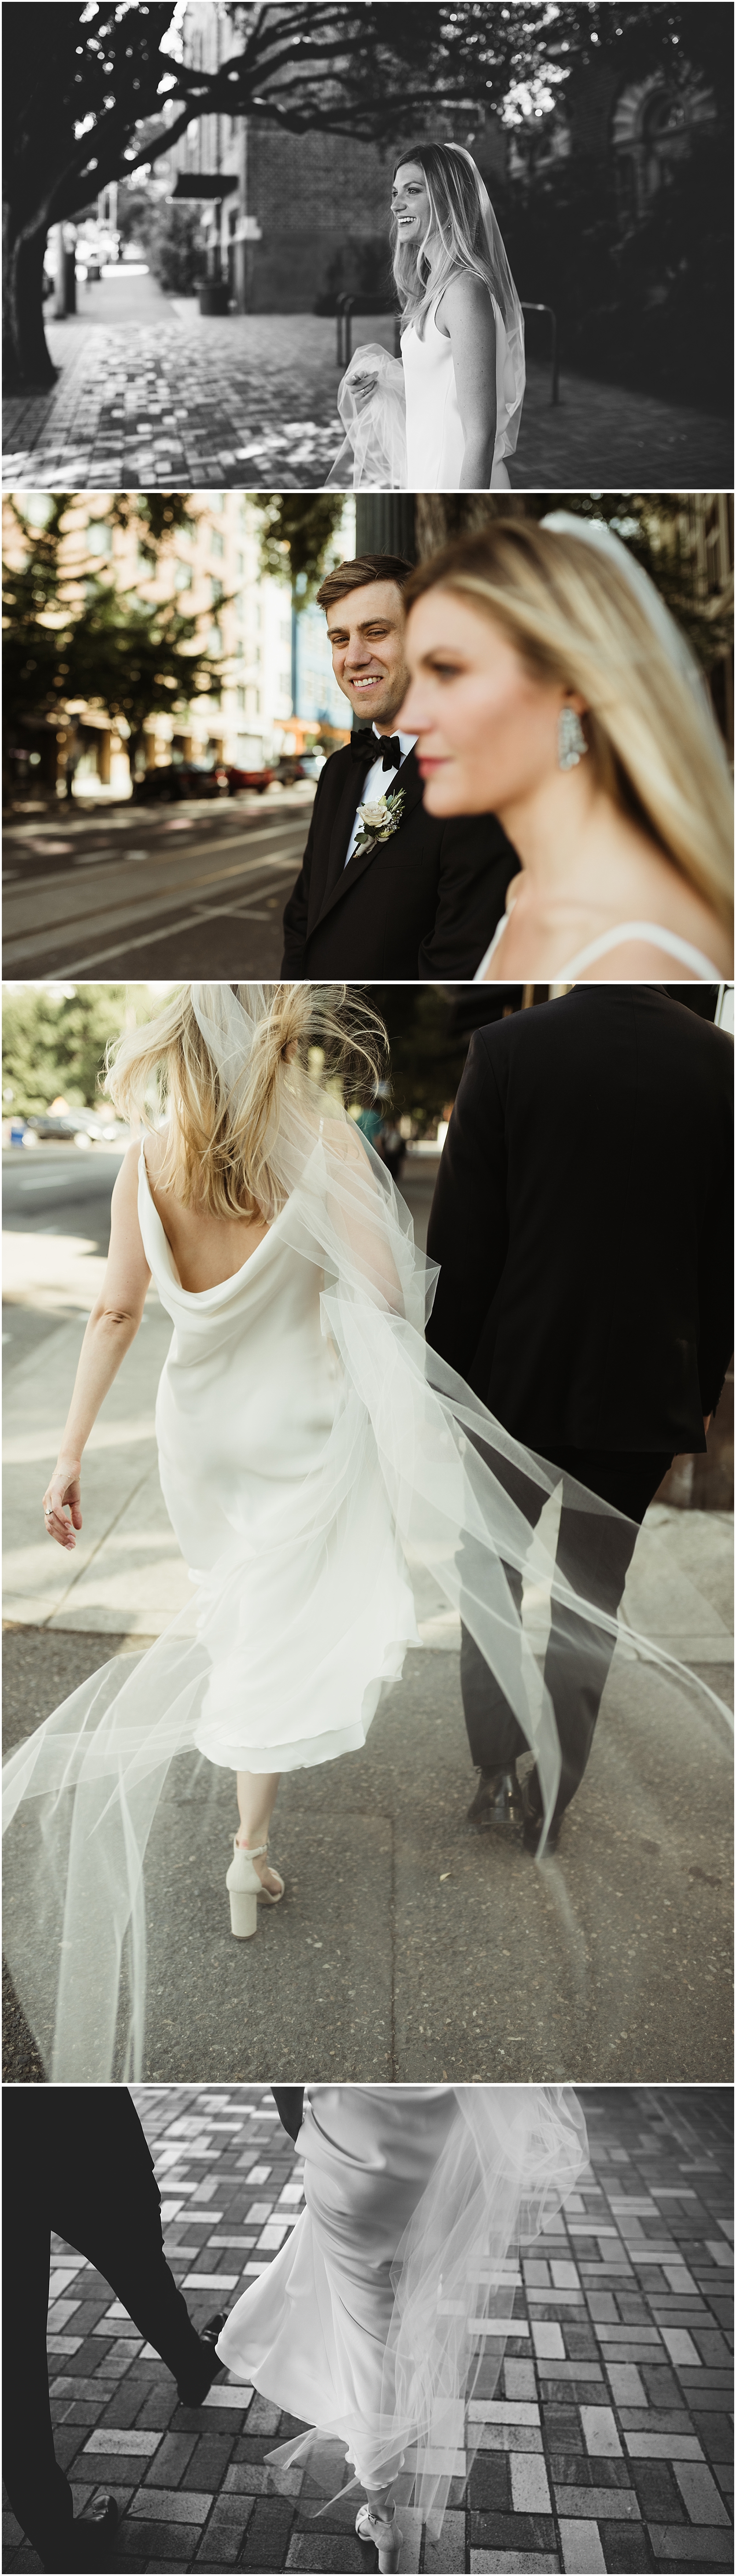 Modern Urban Wedding Photography in Portland, OR // Kate Ames Photography